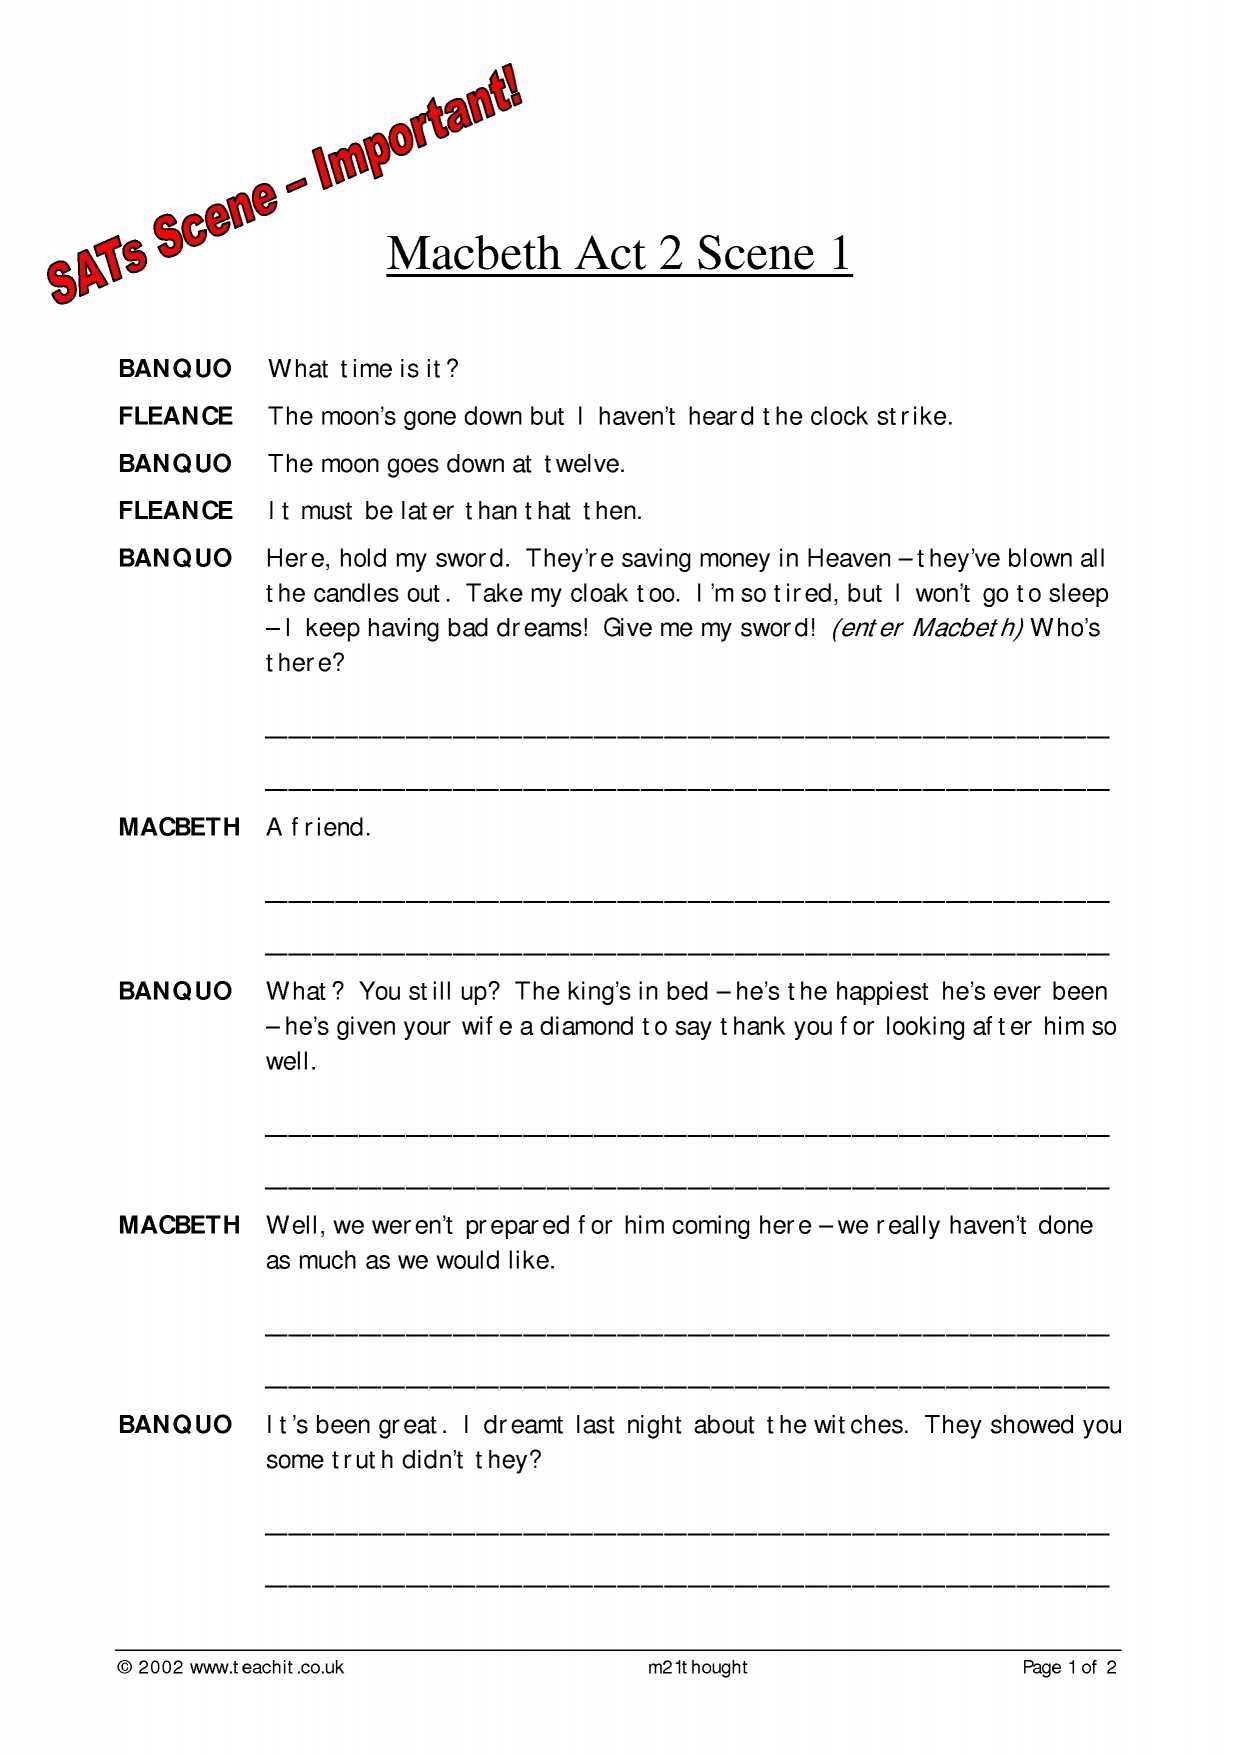 The Truth Of the Matter Worksheet Answers Also Macbeth Search Results Teachit English